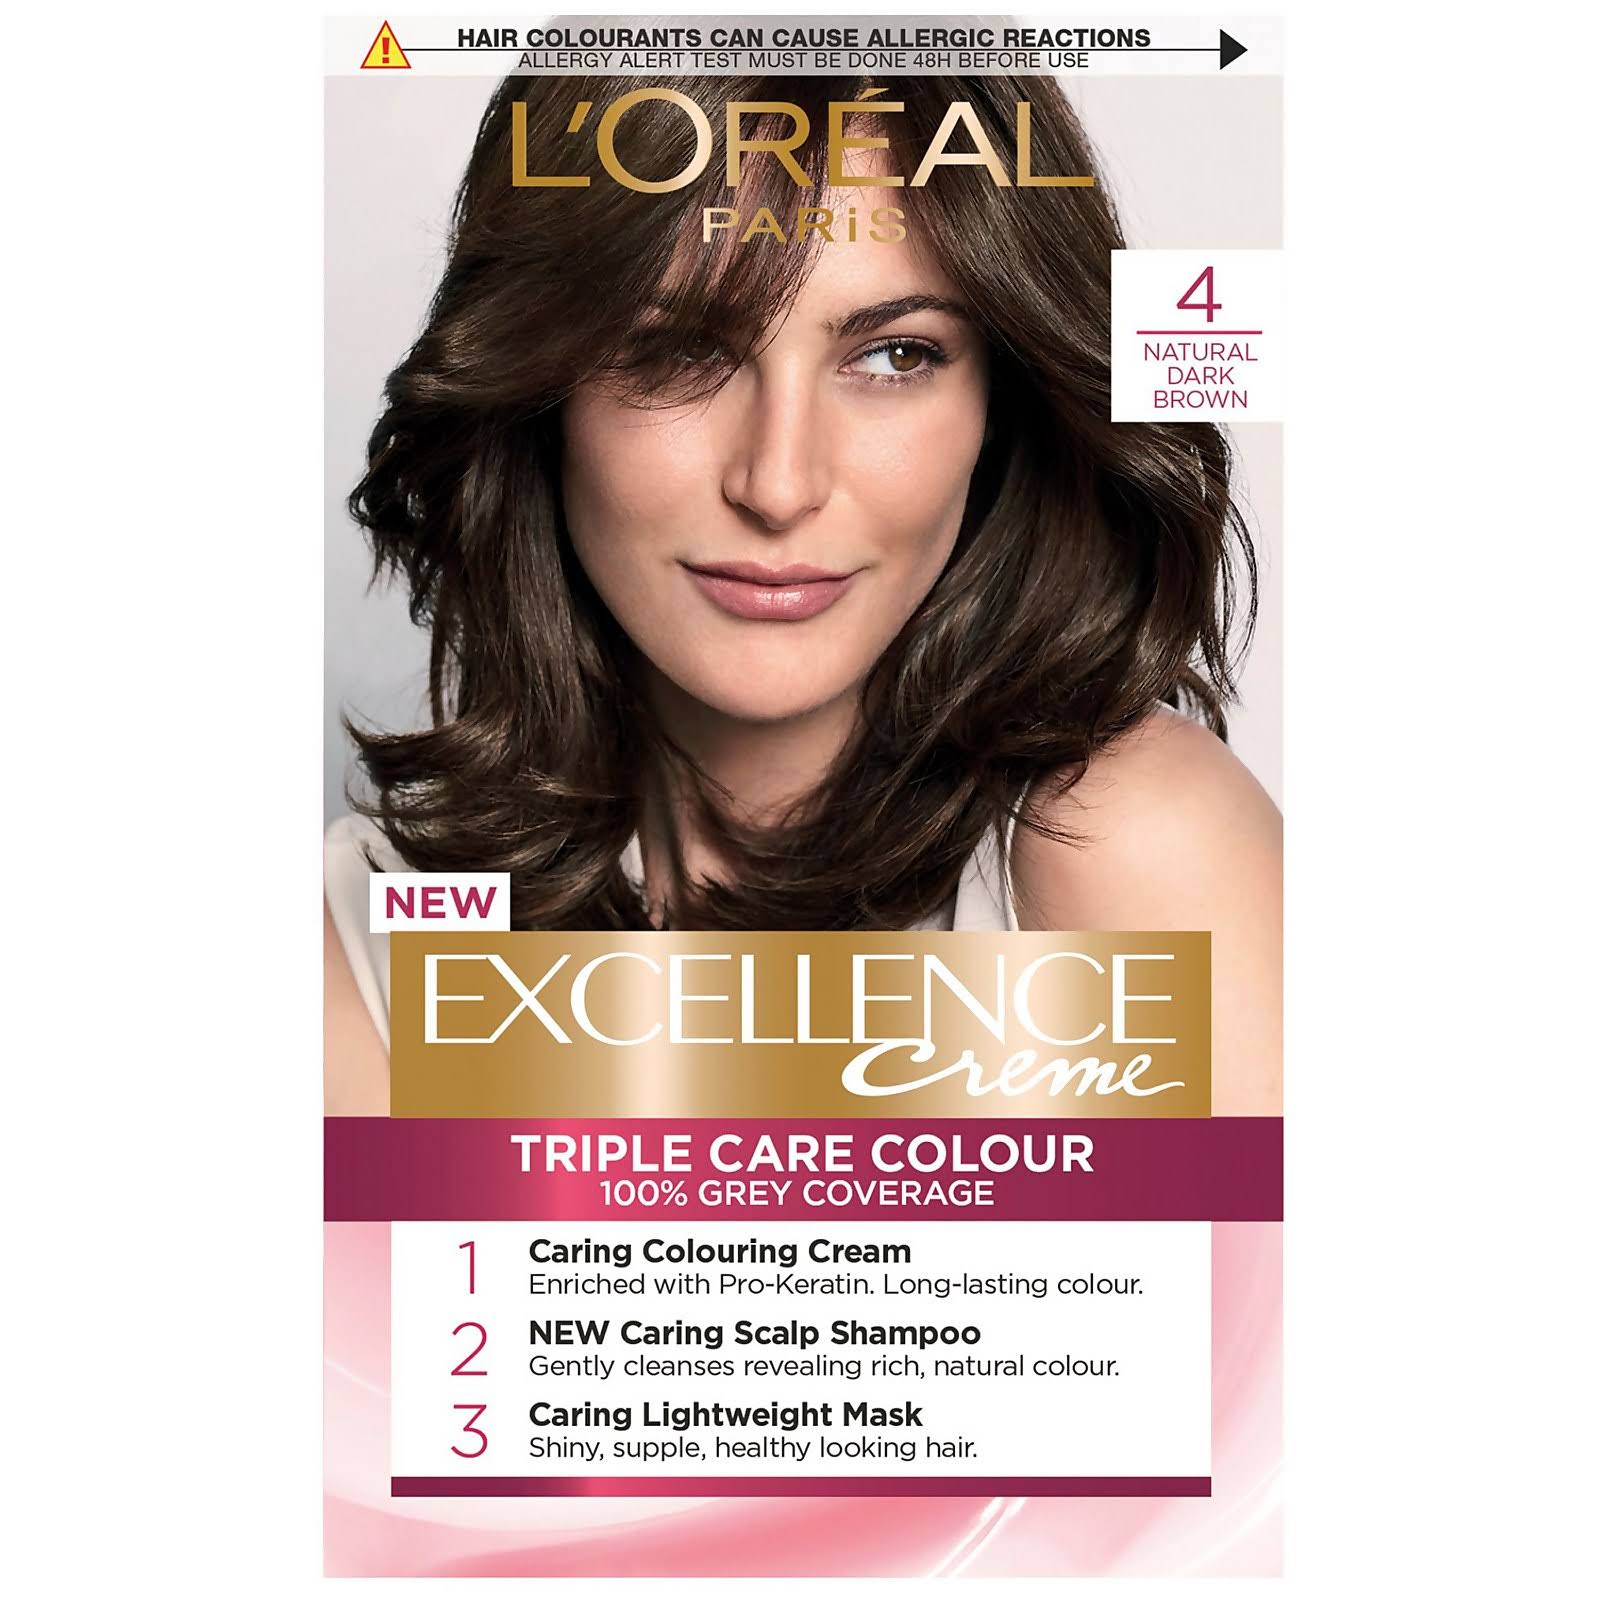 L'oreal Excellence Permanent Hair Dye - 4 Natural Dark Brown